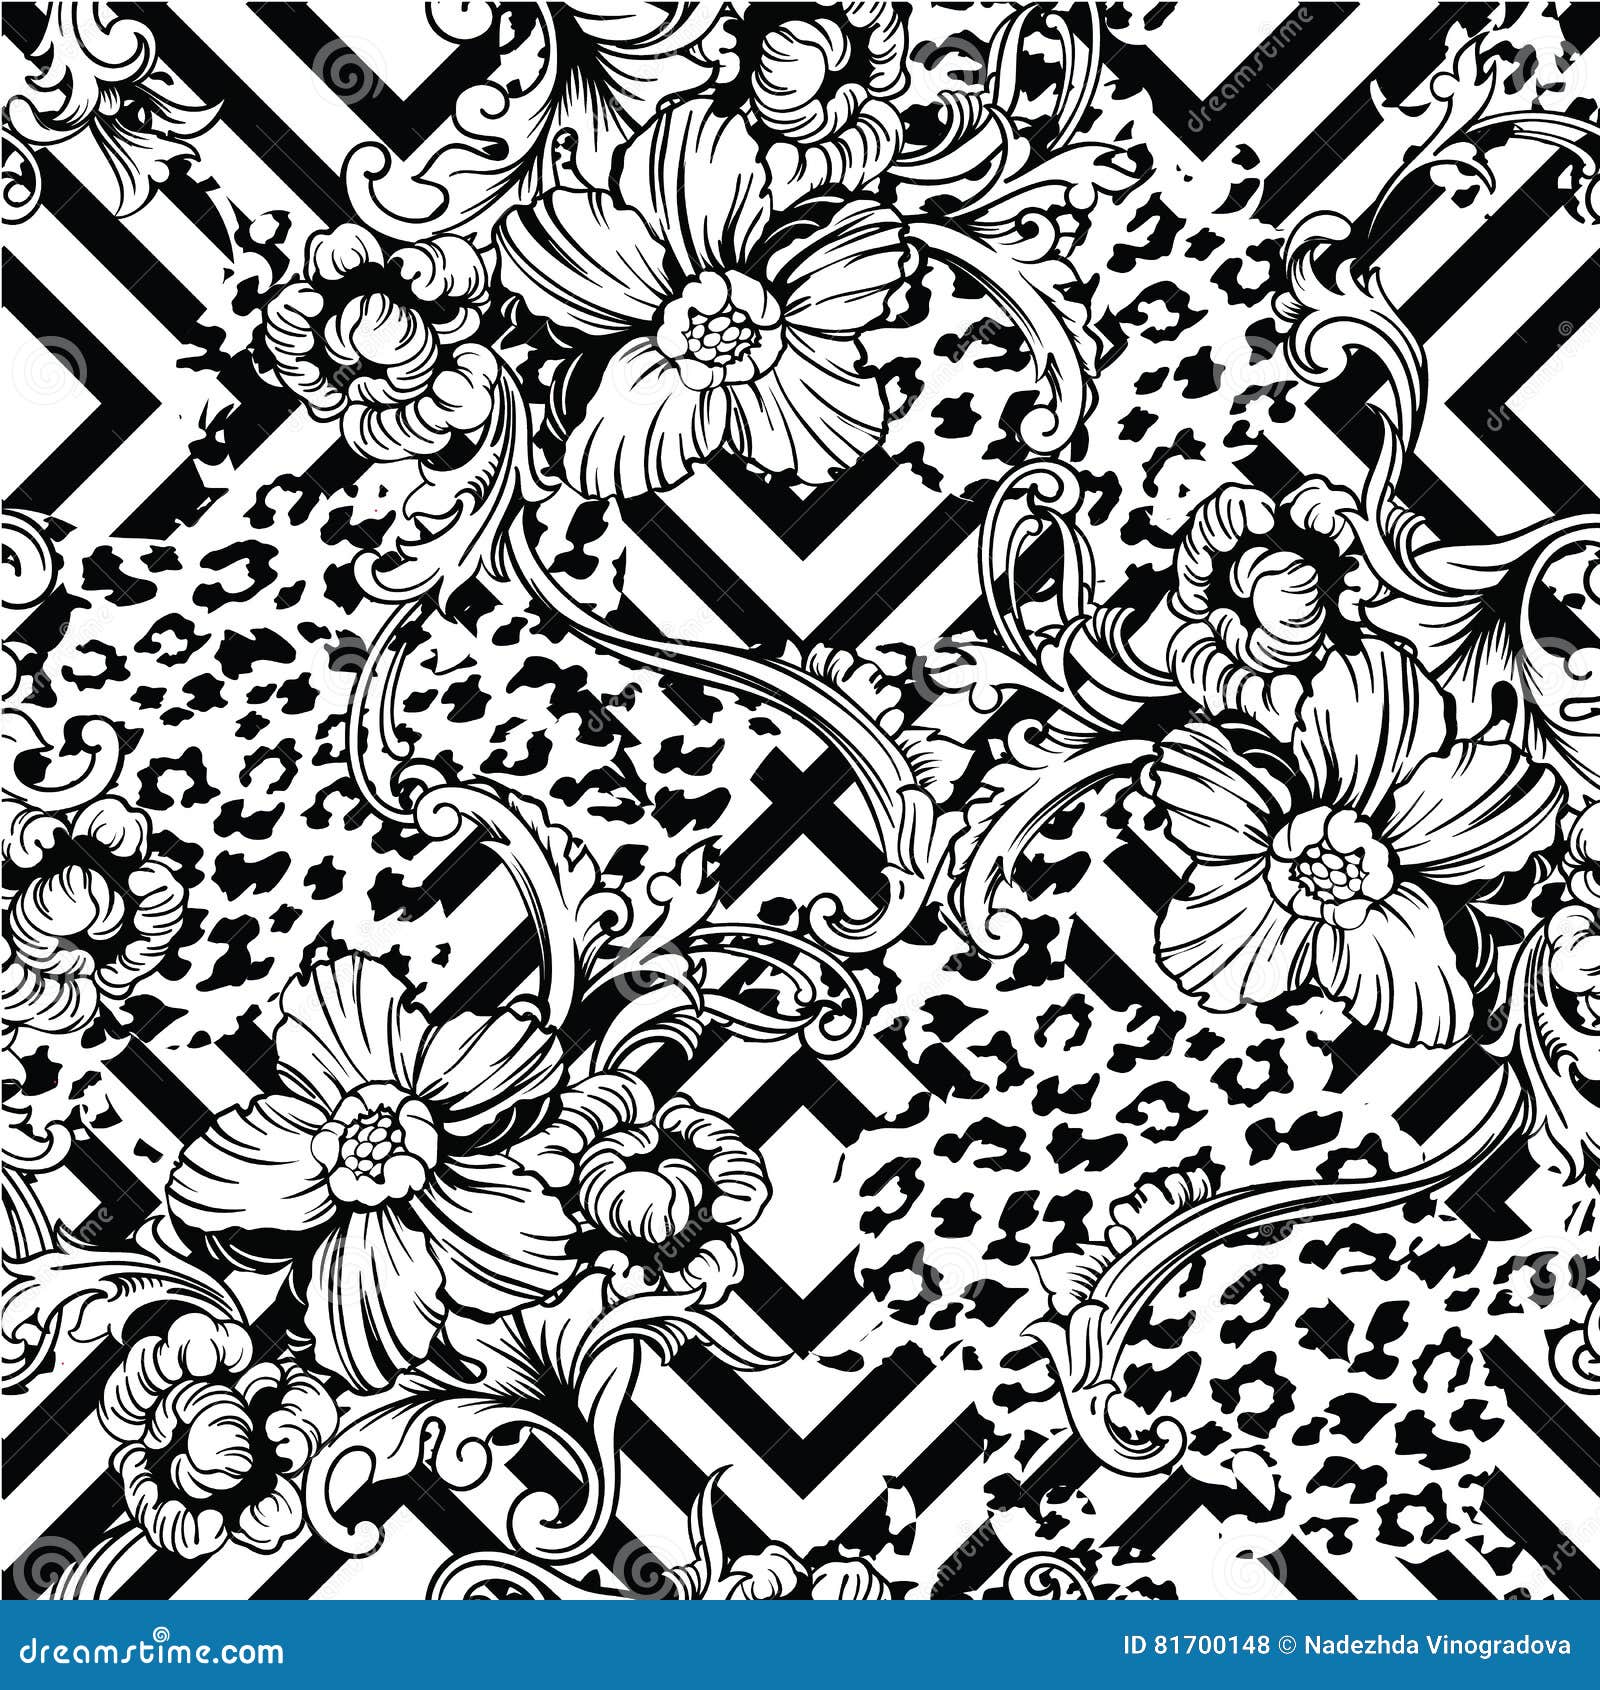 eclectic fabric seamless pattern. animal and geometric background with baroque ornament